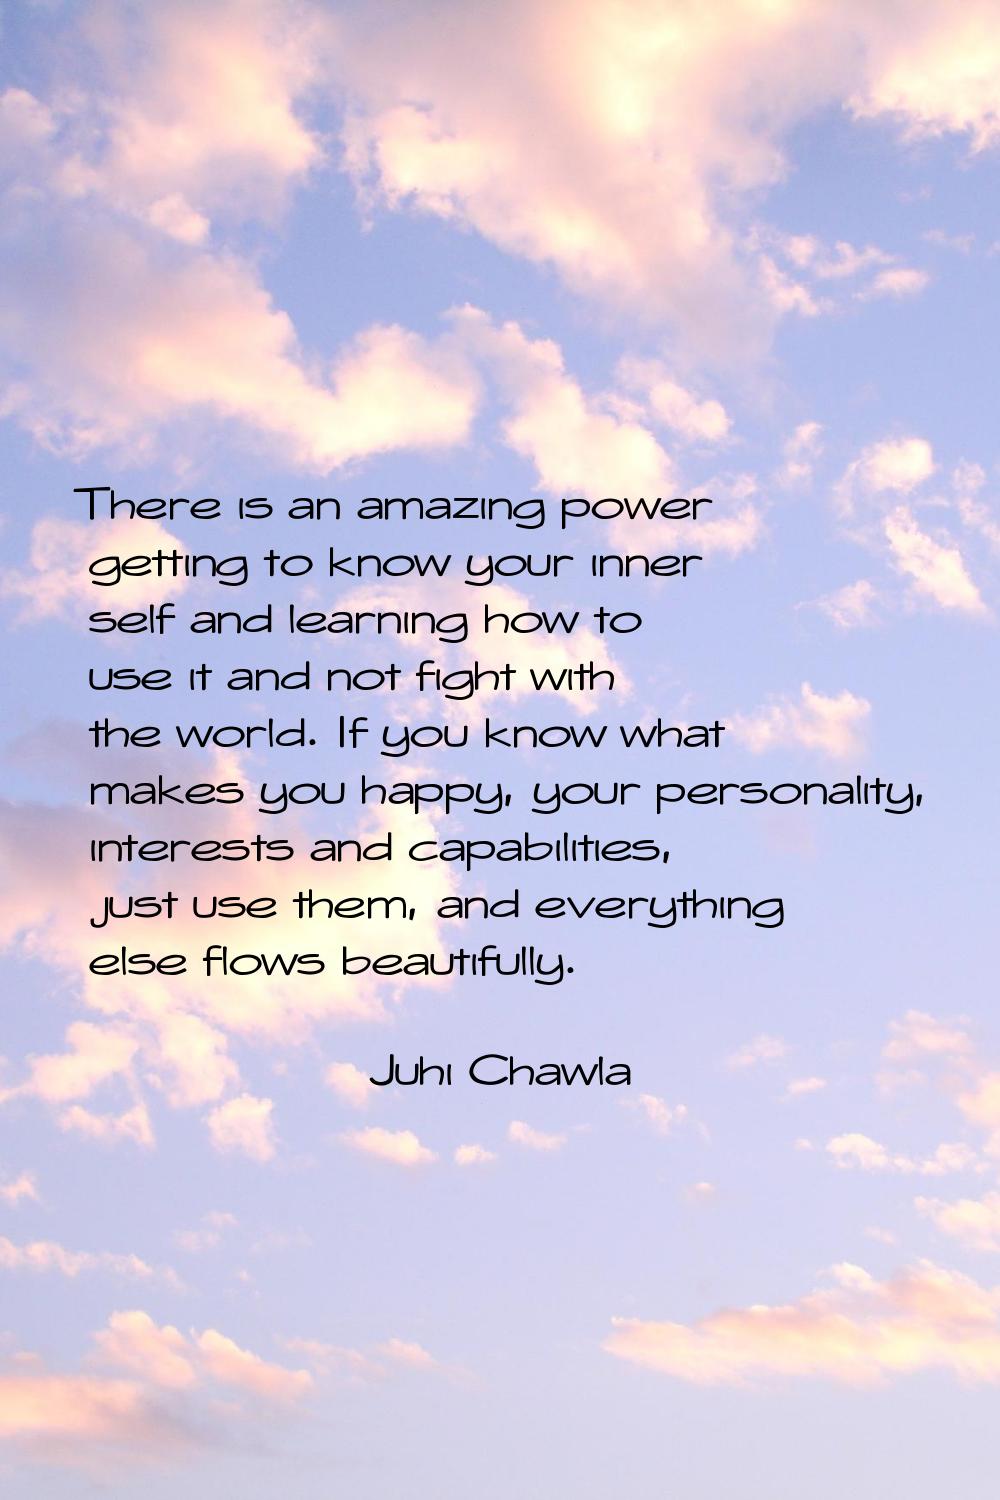 There is an amazing power getting to know your inner self and learning how to use it and not fight 